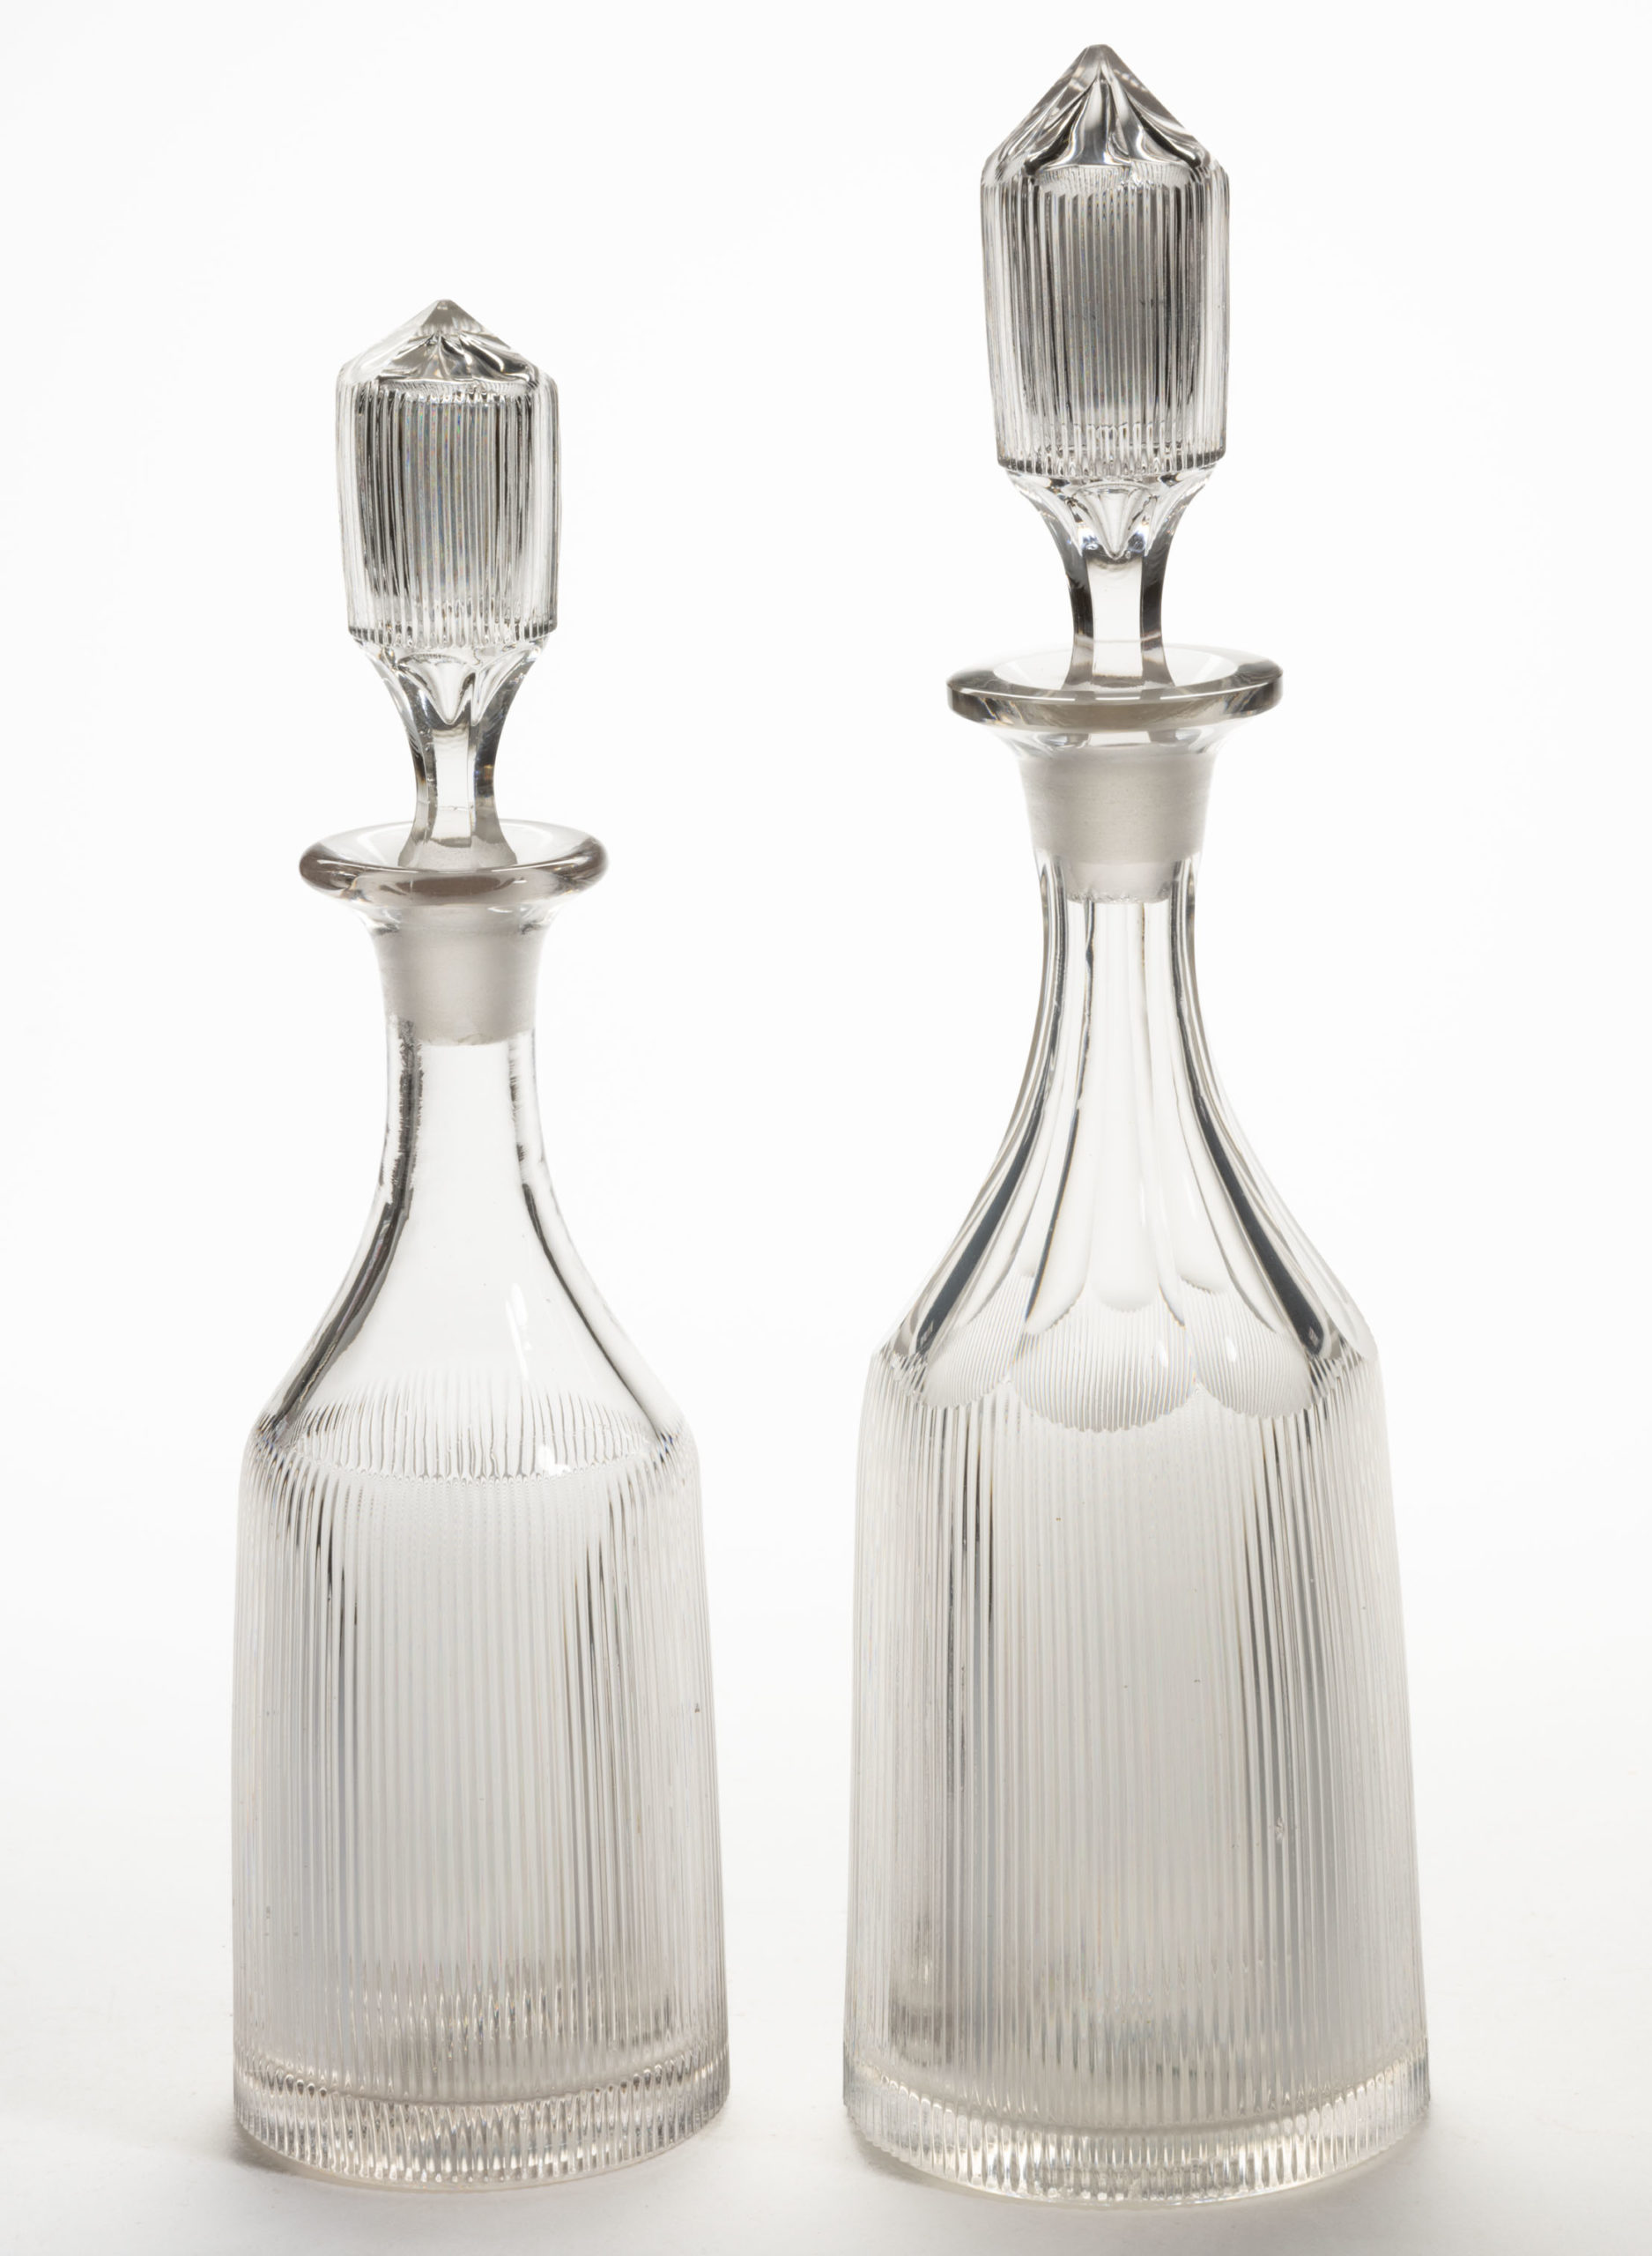 FINE RIB / REEDED (OMN) DECANTERS, LOT OF TWO,